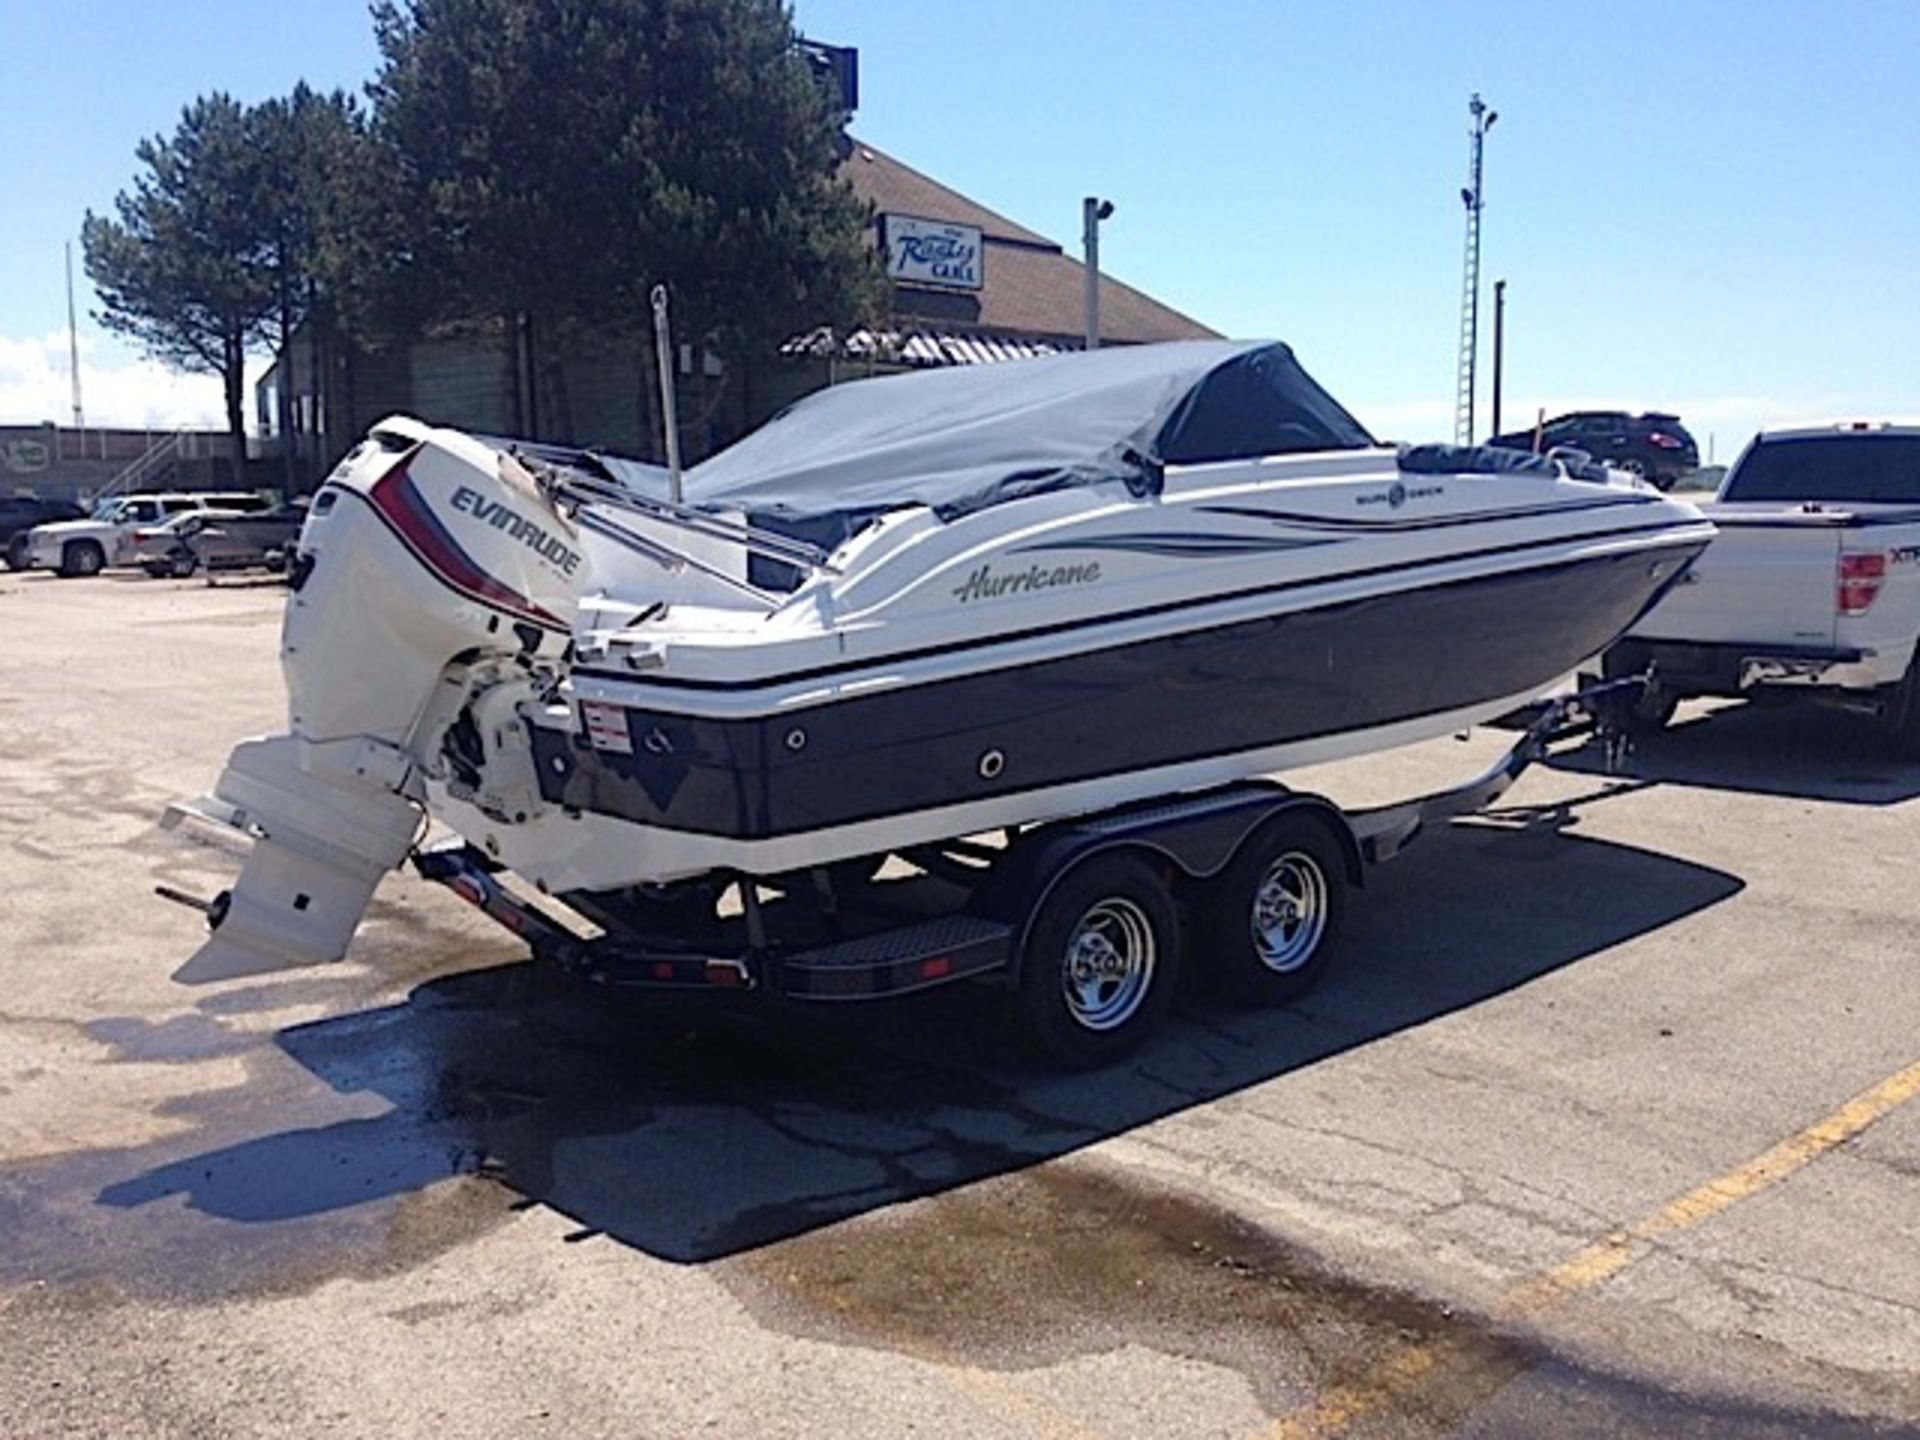 2014 HURRICAN SUNDECK (187) OUTBOARD BOAT WITH TRAILER - NEVER SEEN WATER  (NOT INCLUDING MOTOR) - Image 2 of 6